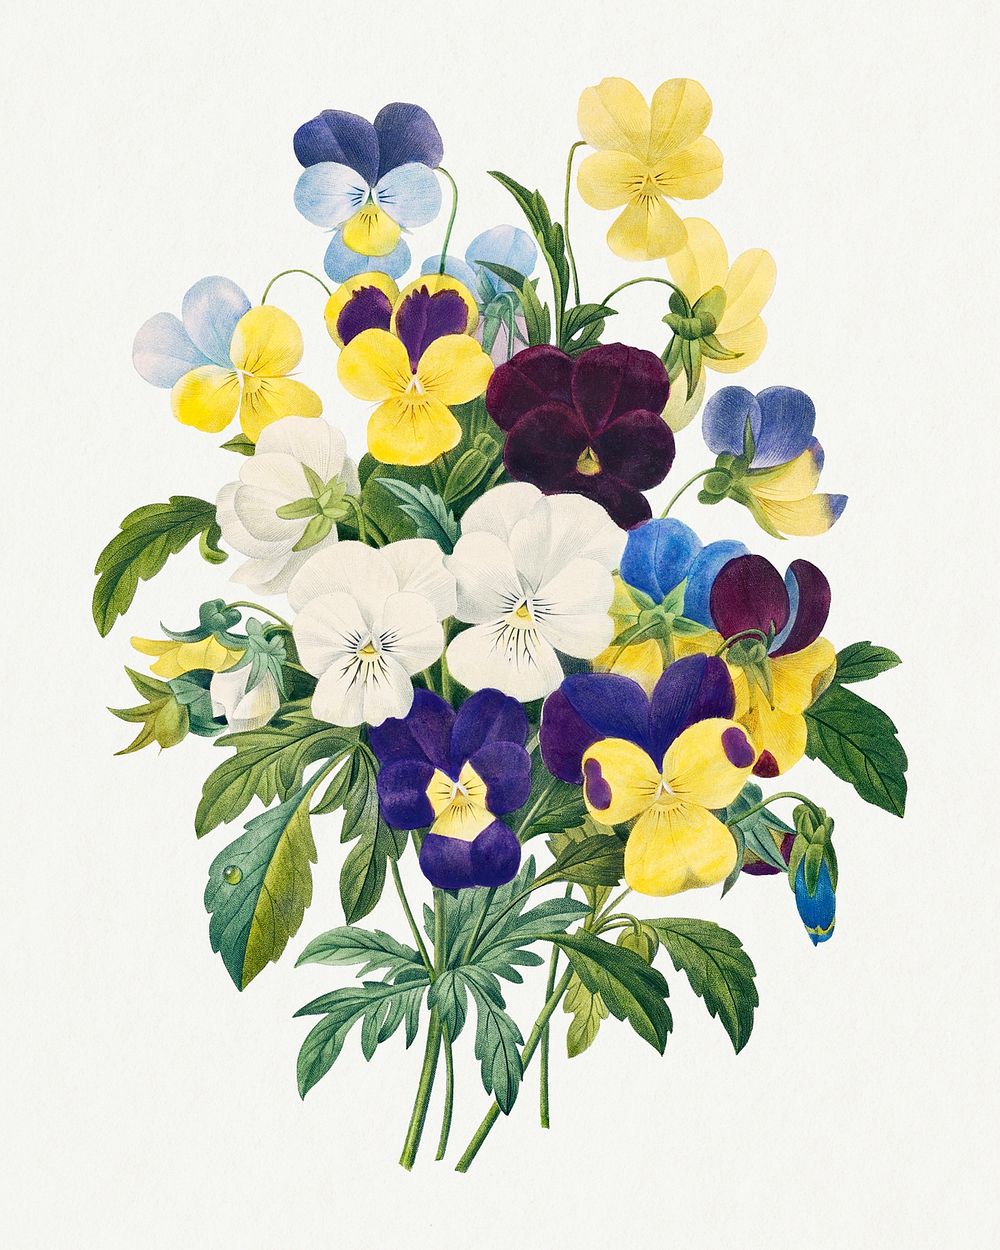 Pansy flower bouquet psd botanical illustration, remixed from artworks by Pierre-Joseph Redout&eacute;